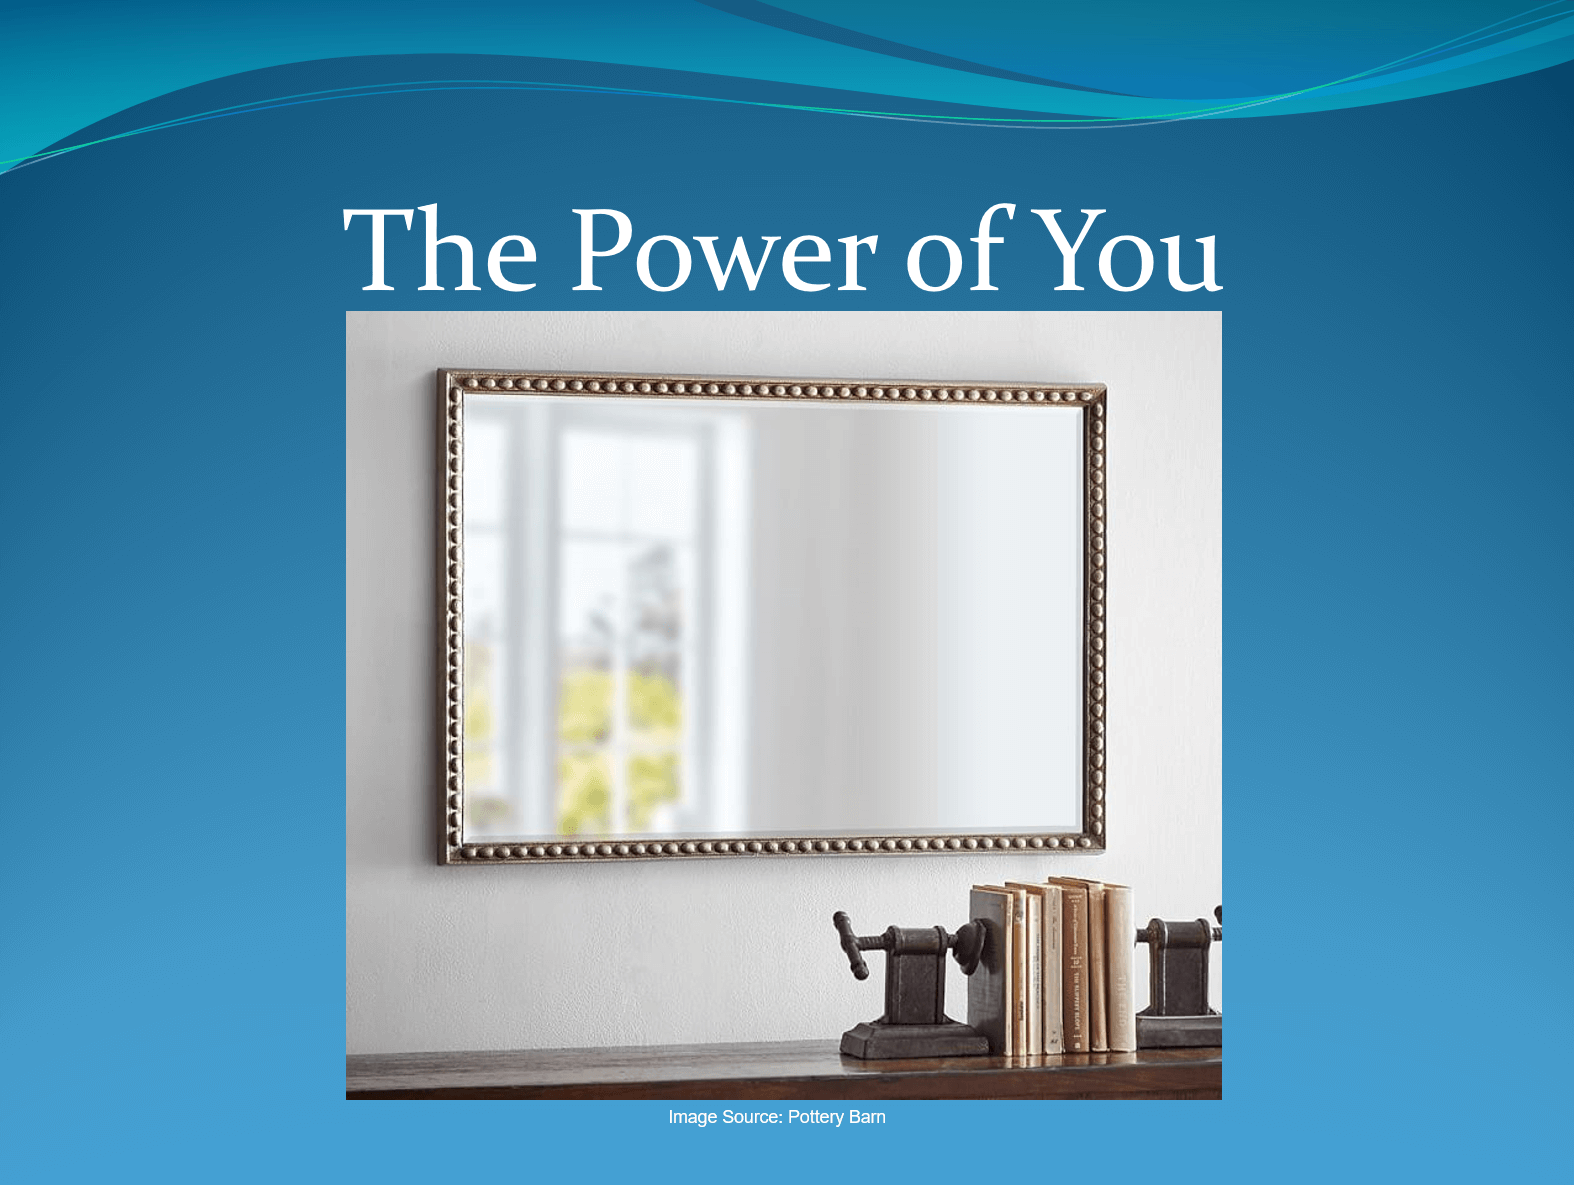 Bilal Qizilbash's 2017 Power of You Talk powerpoint slide featuring a mirror image and a written title saying ''The Power of You''.